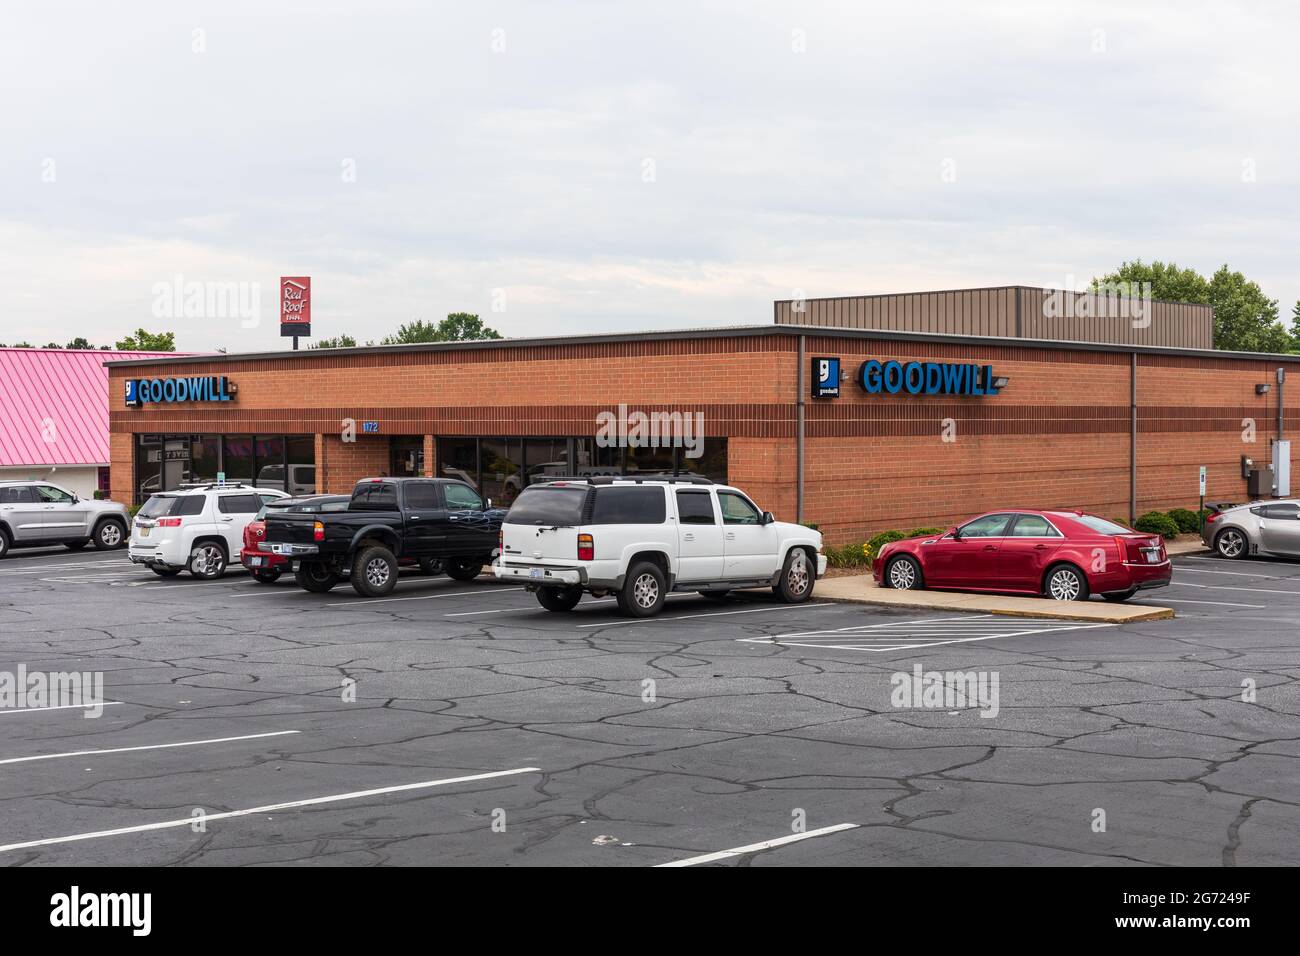 HICKORY, NC, USA-7 JULY 2021: A Goodwill Store showing building front, parking lot, cars and Goodwill signs. Stock Photo